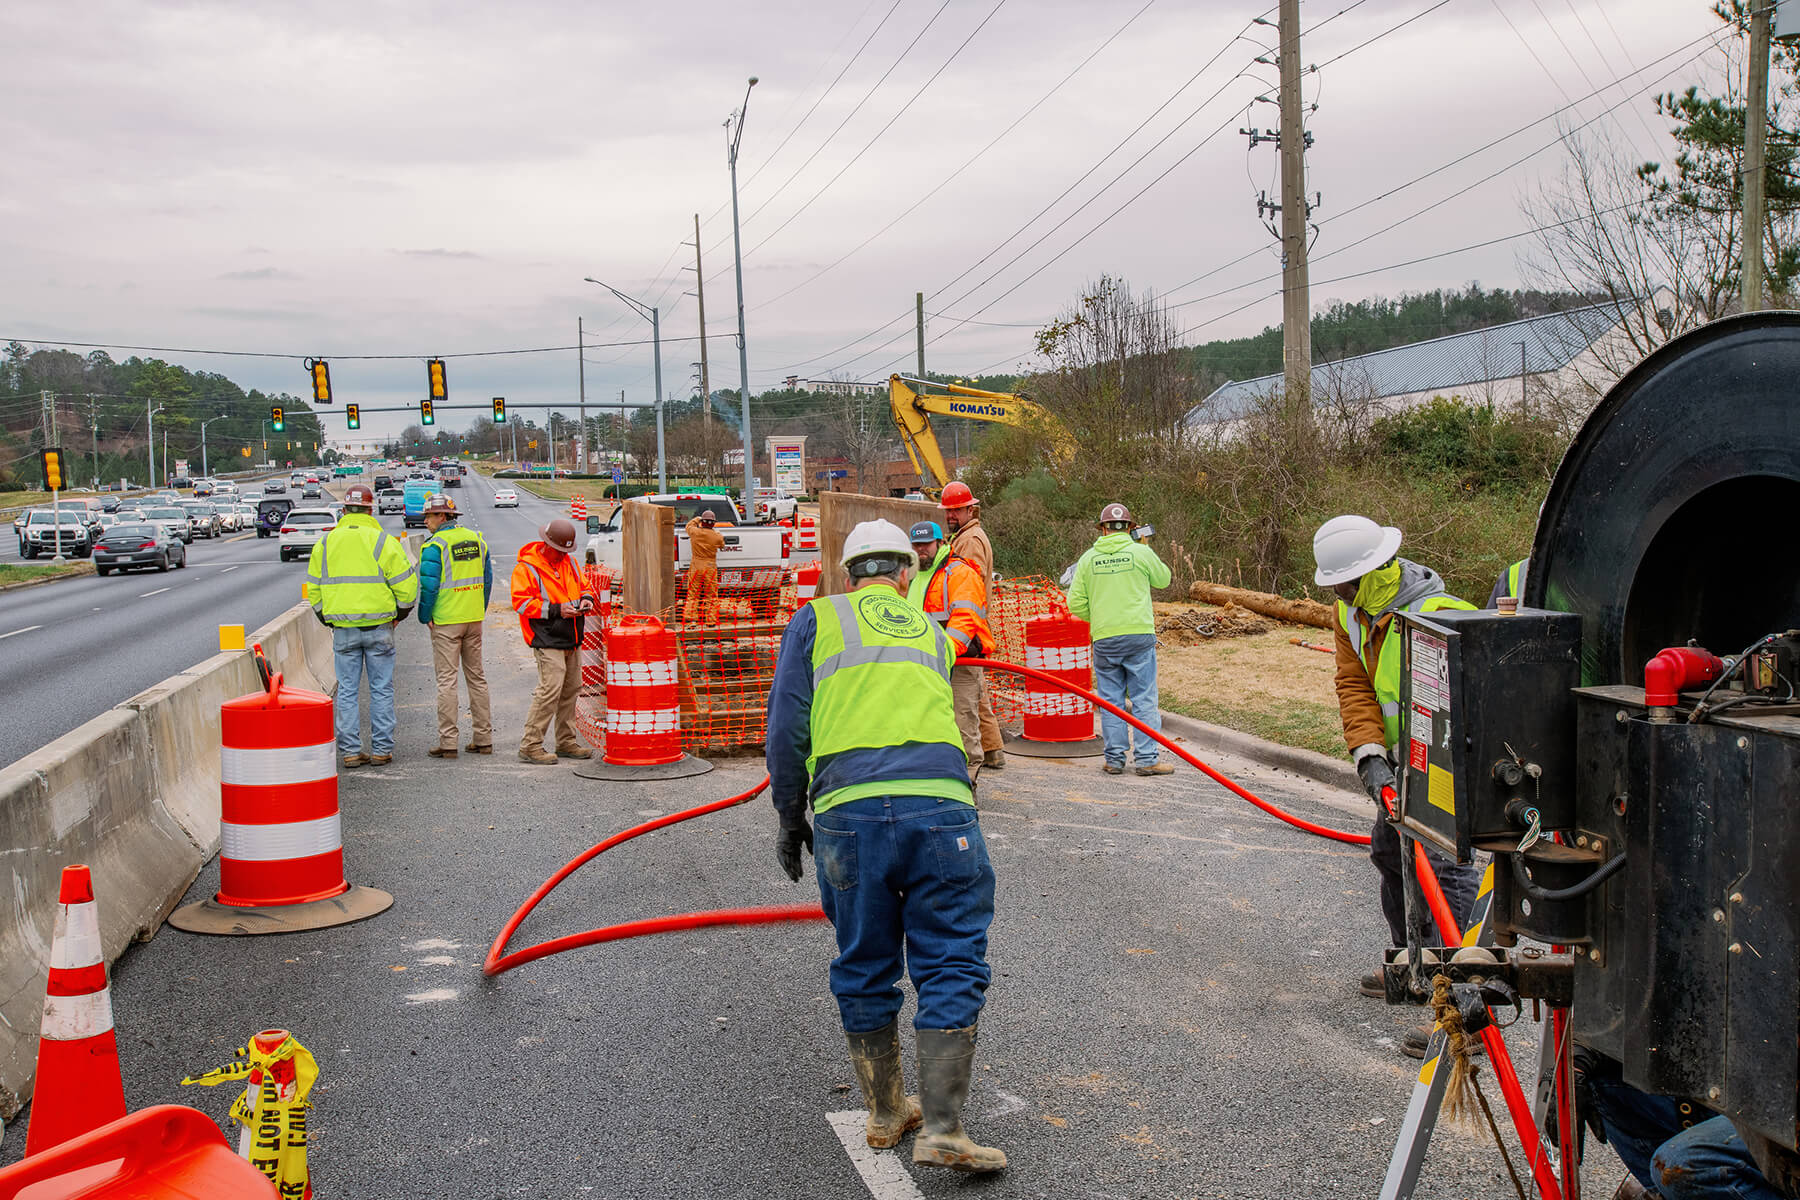 A group of workers in safety vests and helmets carry out repairs to Highway 280.